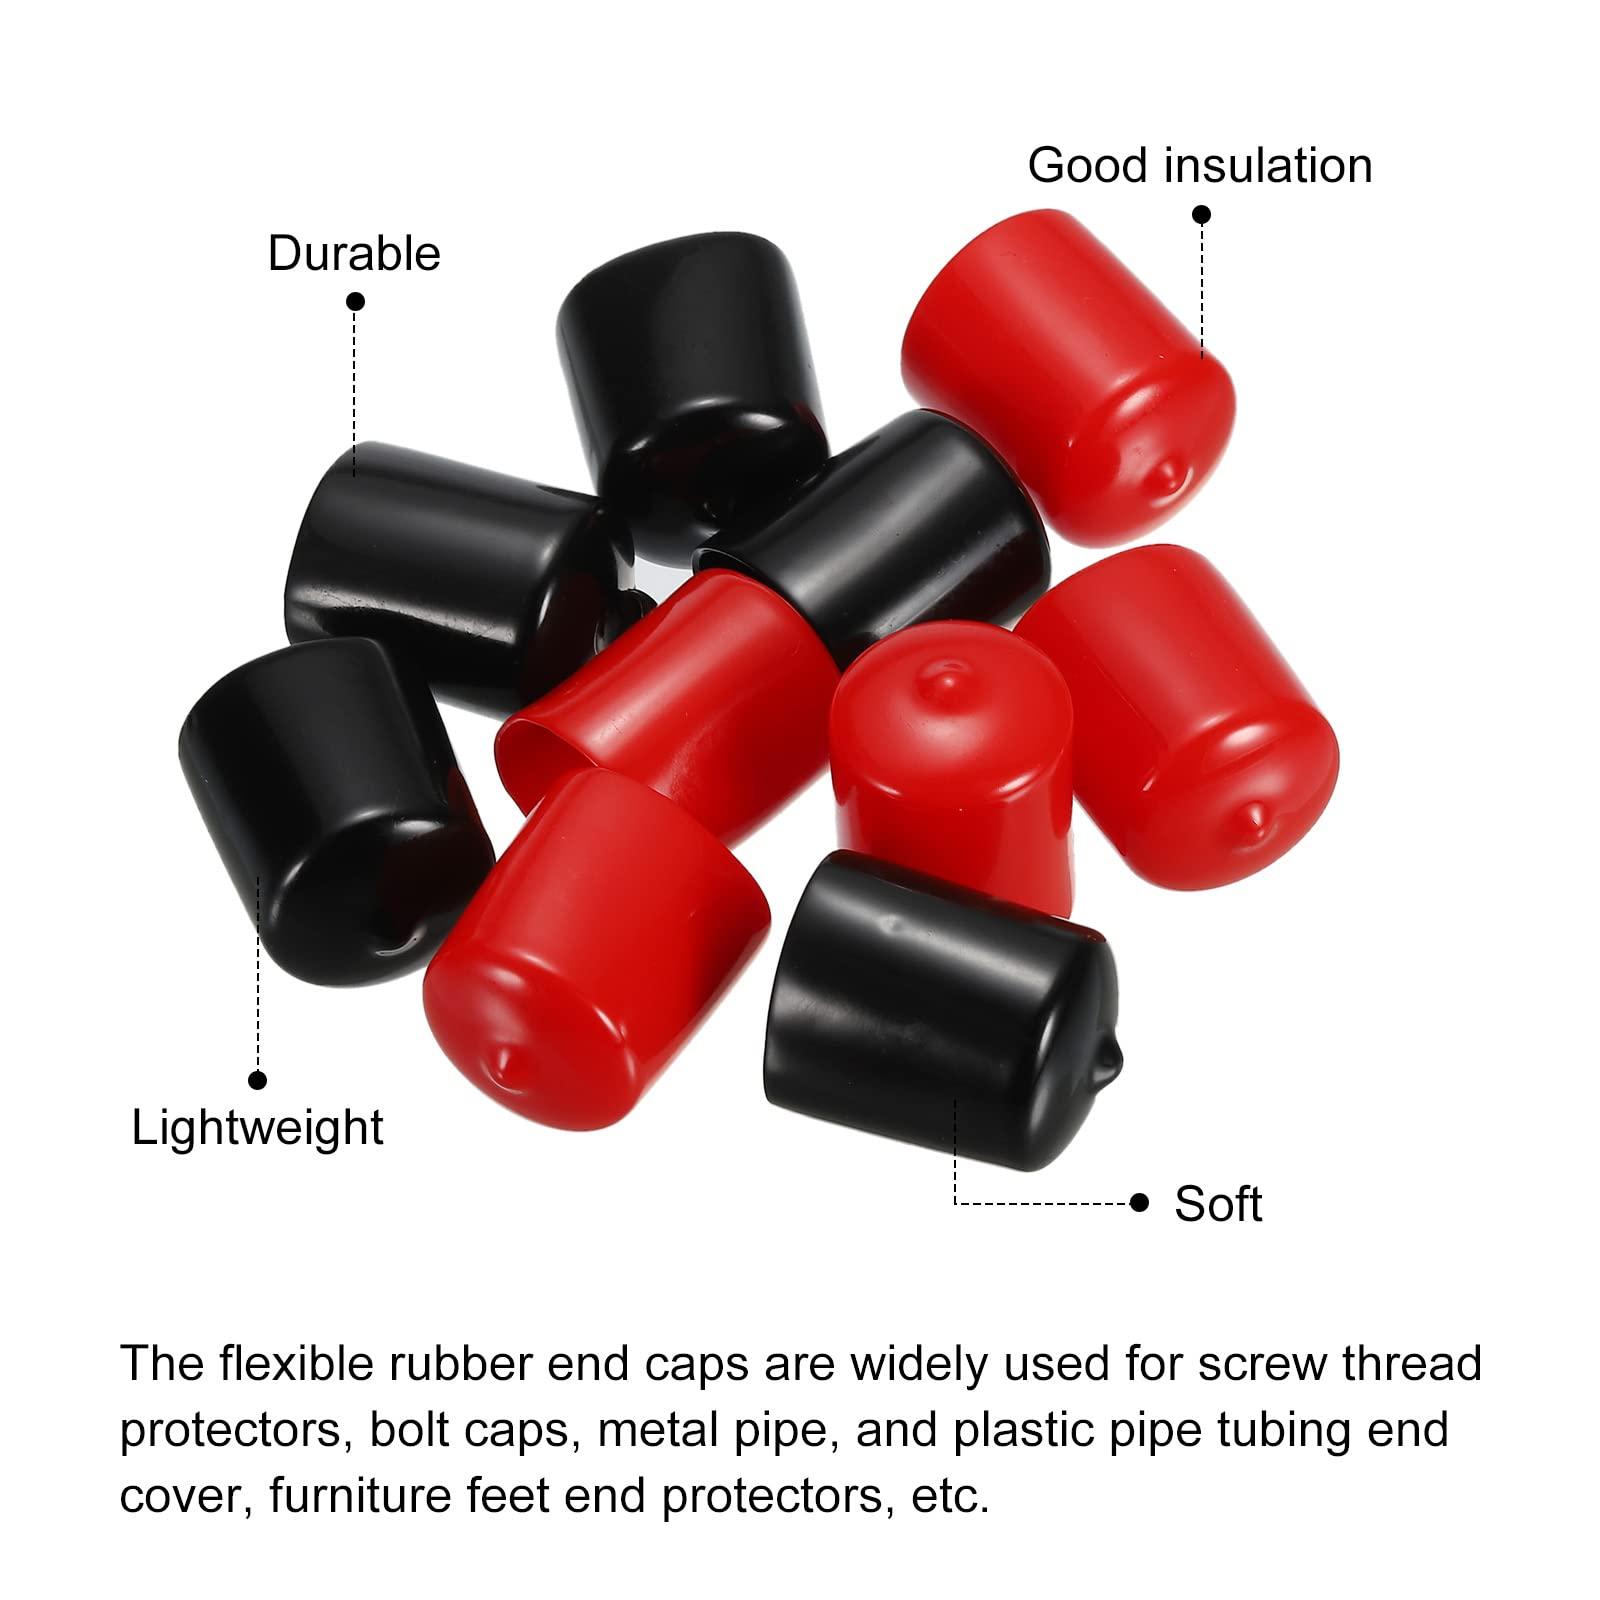 sourcing map 10pcs Rubber End Caps Cover Assortment 26mm PVC Vinyl Screw Thread Protector for Screw Bolt, Black Red 3